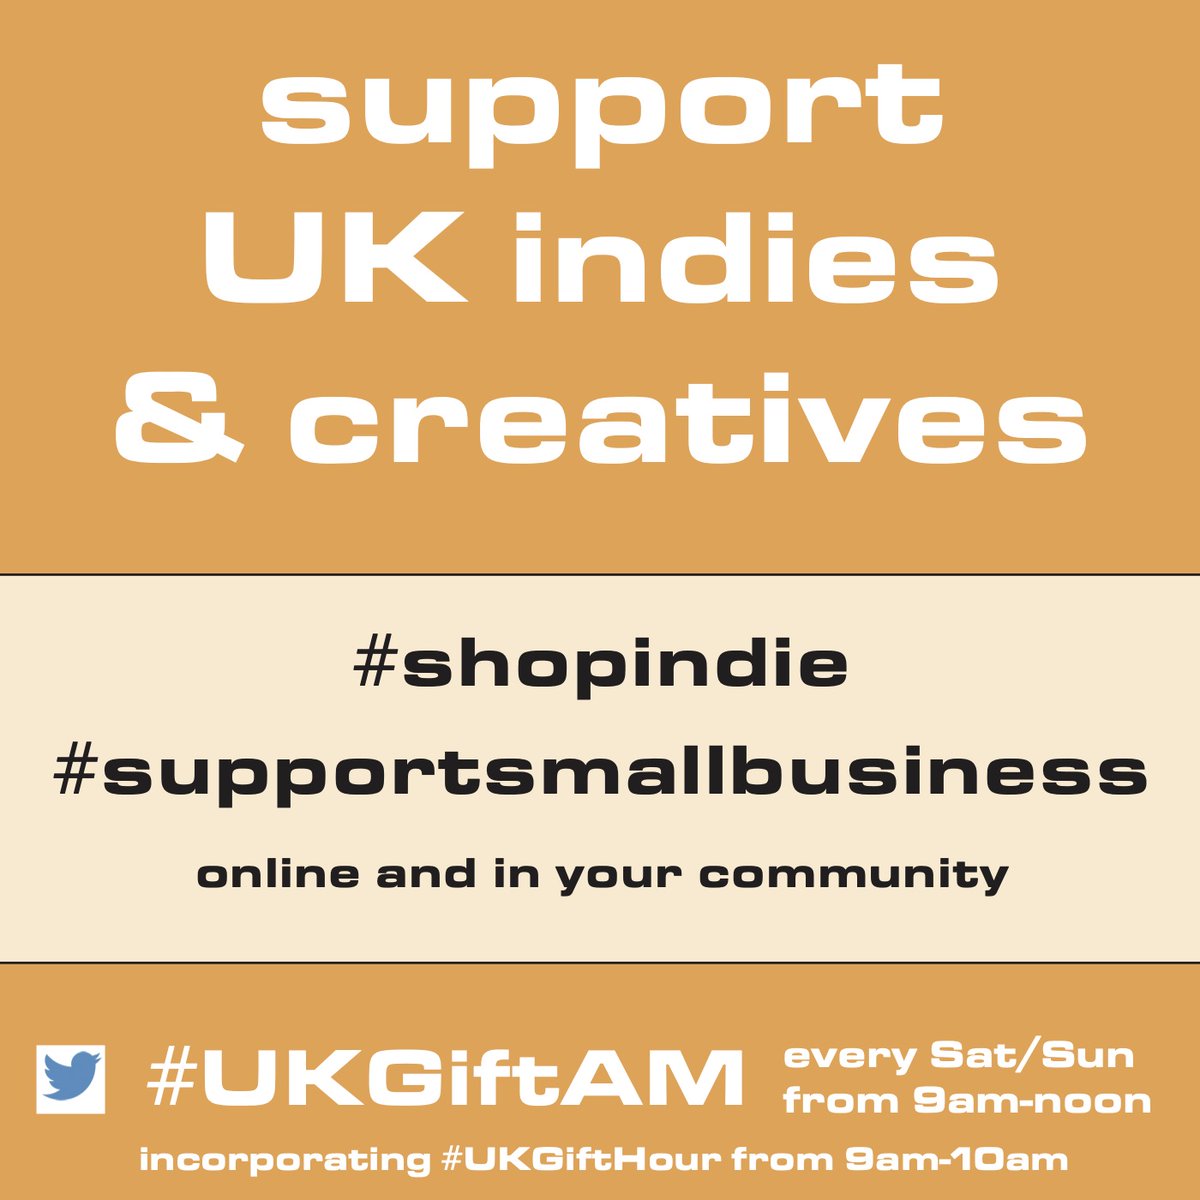 If you like surprises and you like to #supportsmallbusiness, then tag along with our #SundayMorning #shopindie community 🤗 #UKGiftHour #UKGiftAM is here from 9am showcasing #giftideas with a difference from UK indies & creatives - a great way to start the day! All welcome🎁